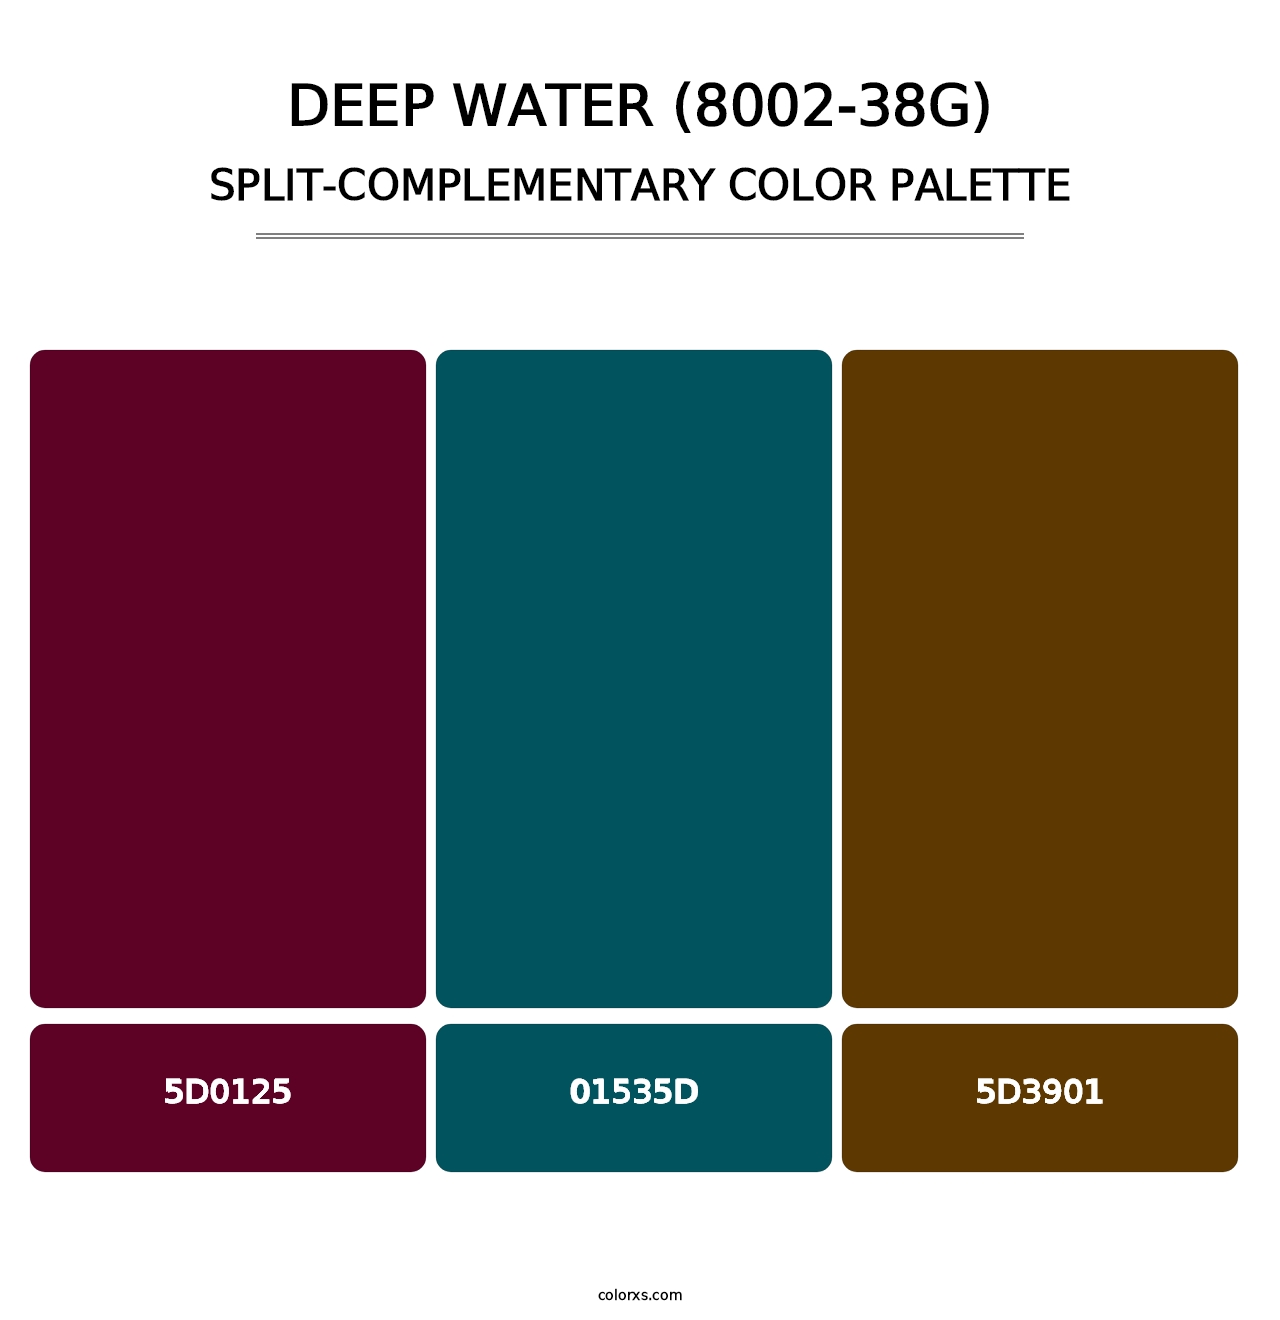 Deep Water (8002-38G) - Split-Complementary Color Palette